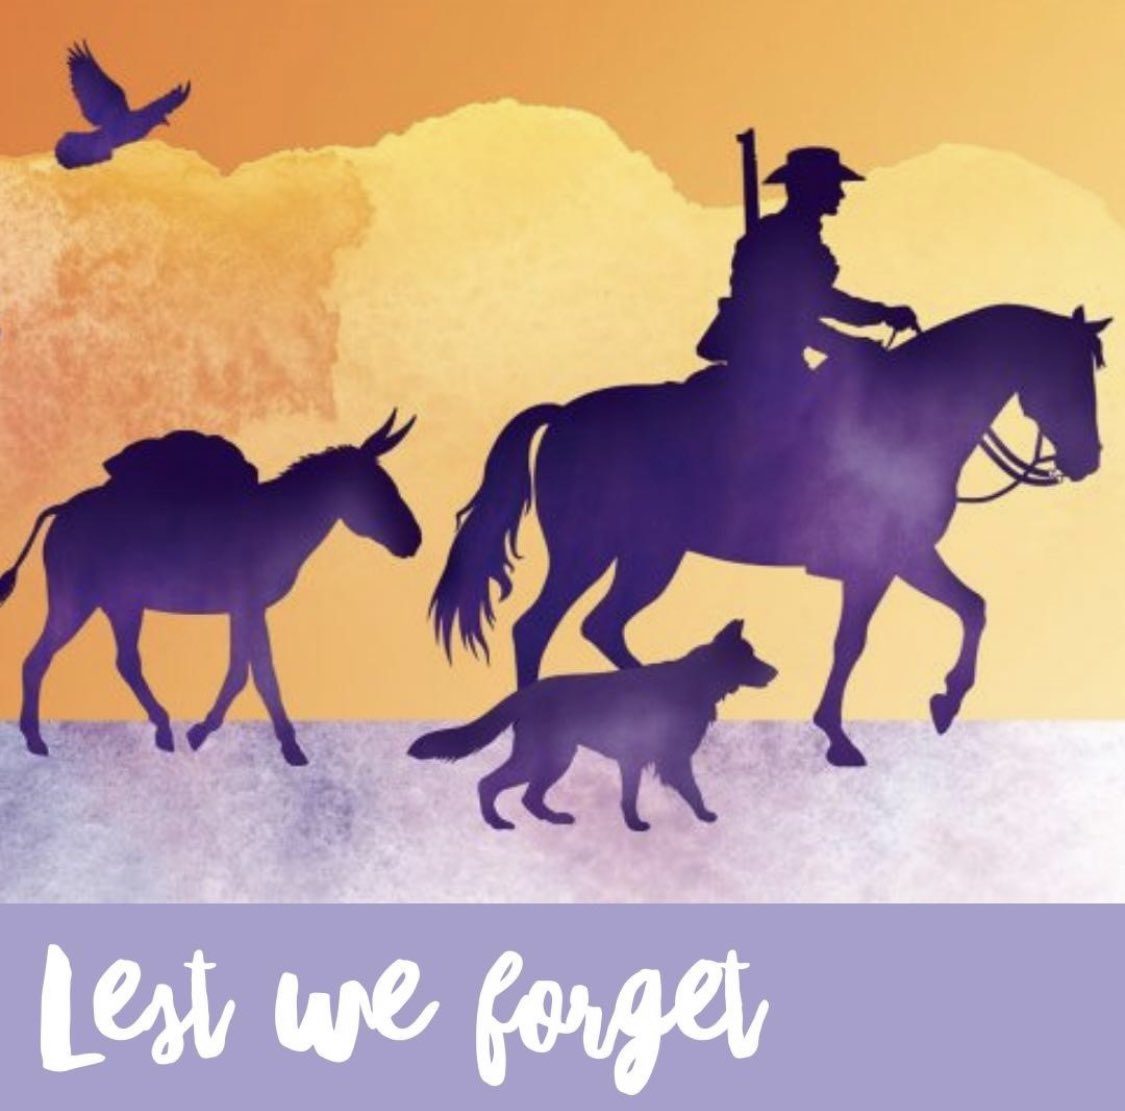 Animal Action Greece в Twitter: „💜 Remembering the working animals of war  💜 Today we remember not only the brave men and women who fought, but the  millions of horses, donkeys, mules